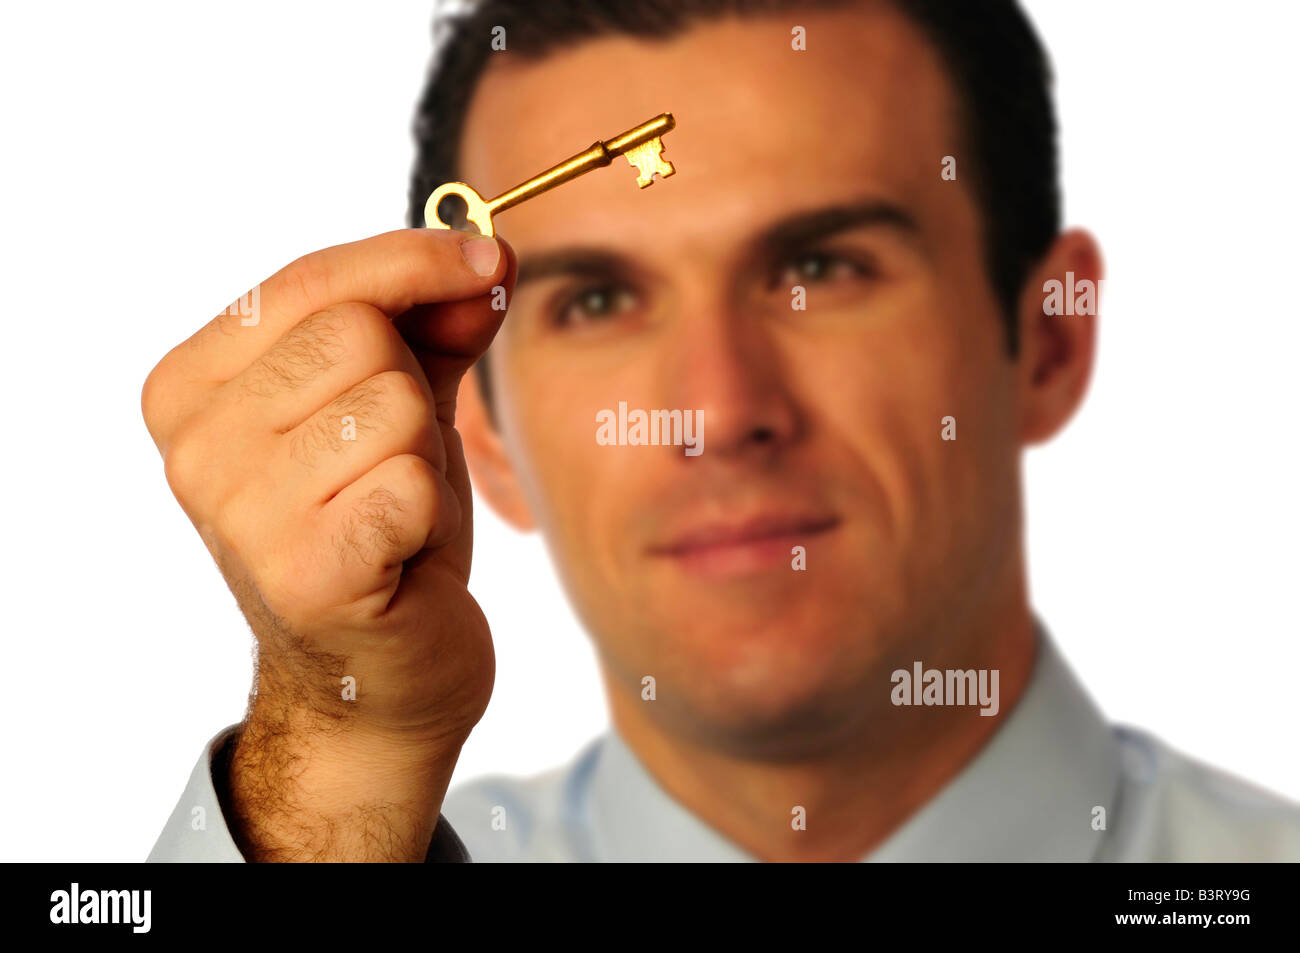 Man looking at gold skeleton key representing opportunity Stock Photo